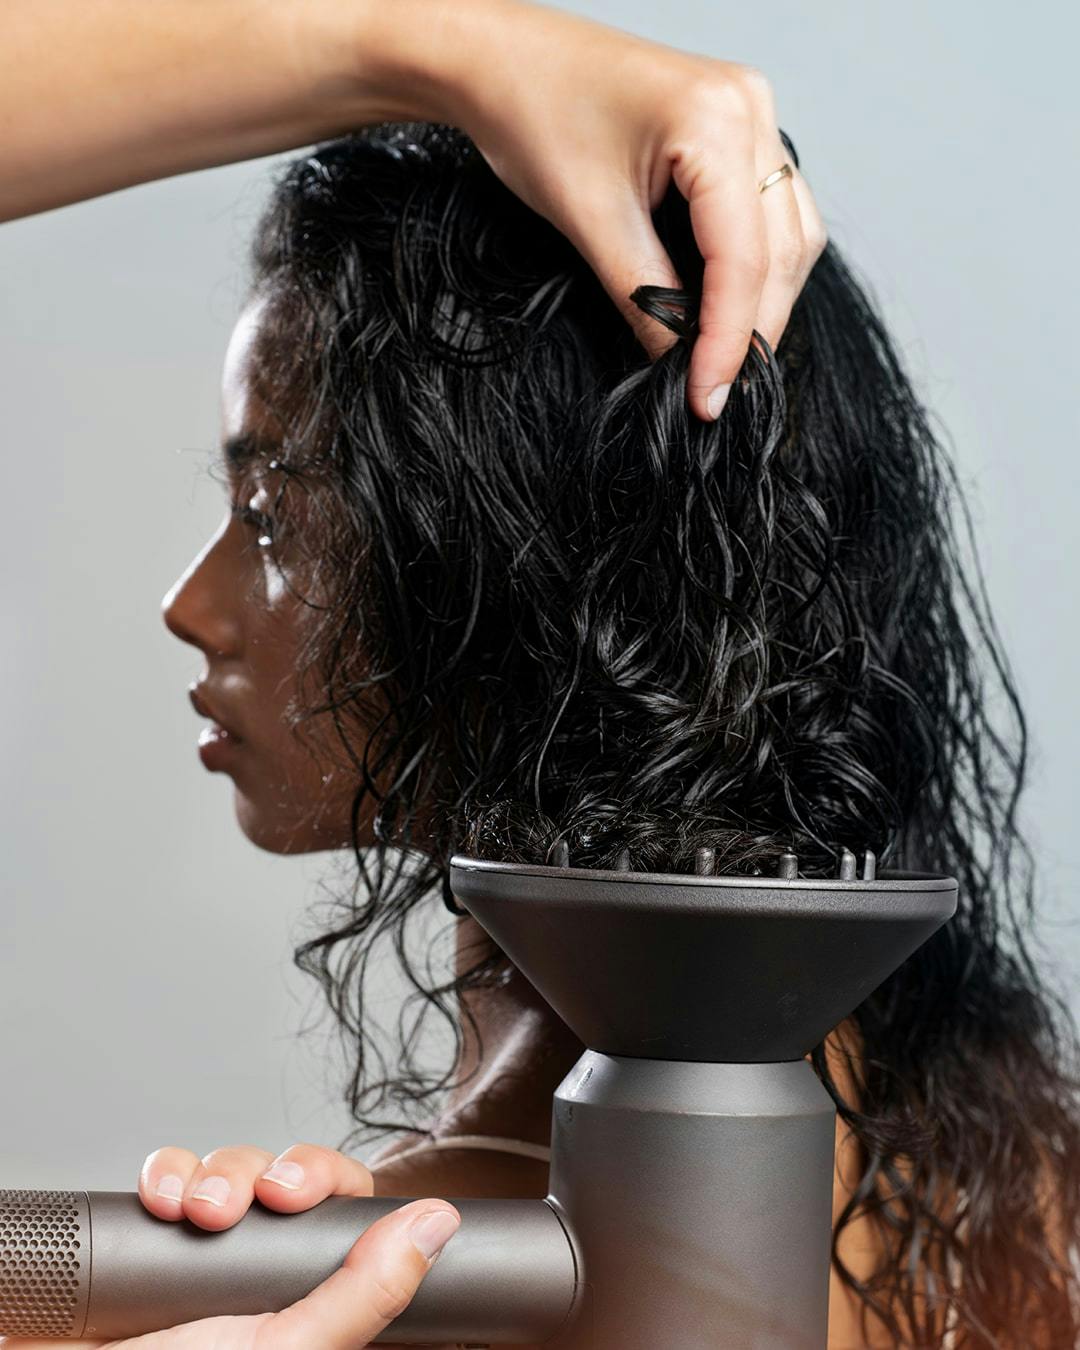 Image of Keune Haircosmetics model getting a blow-out